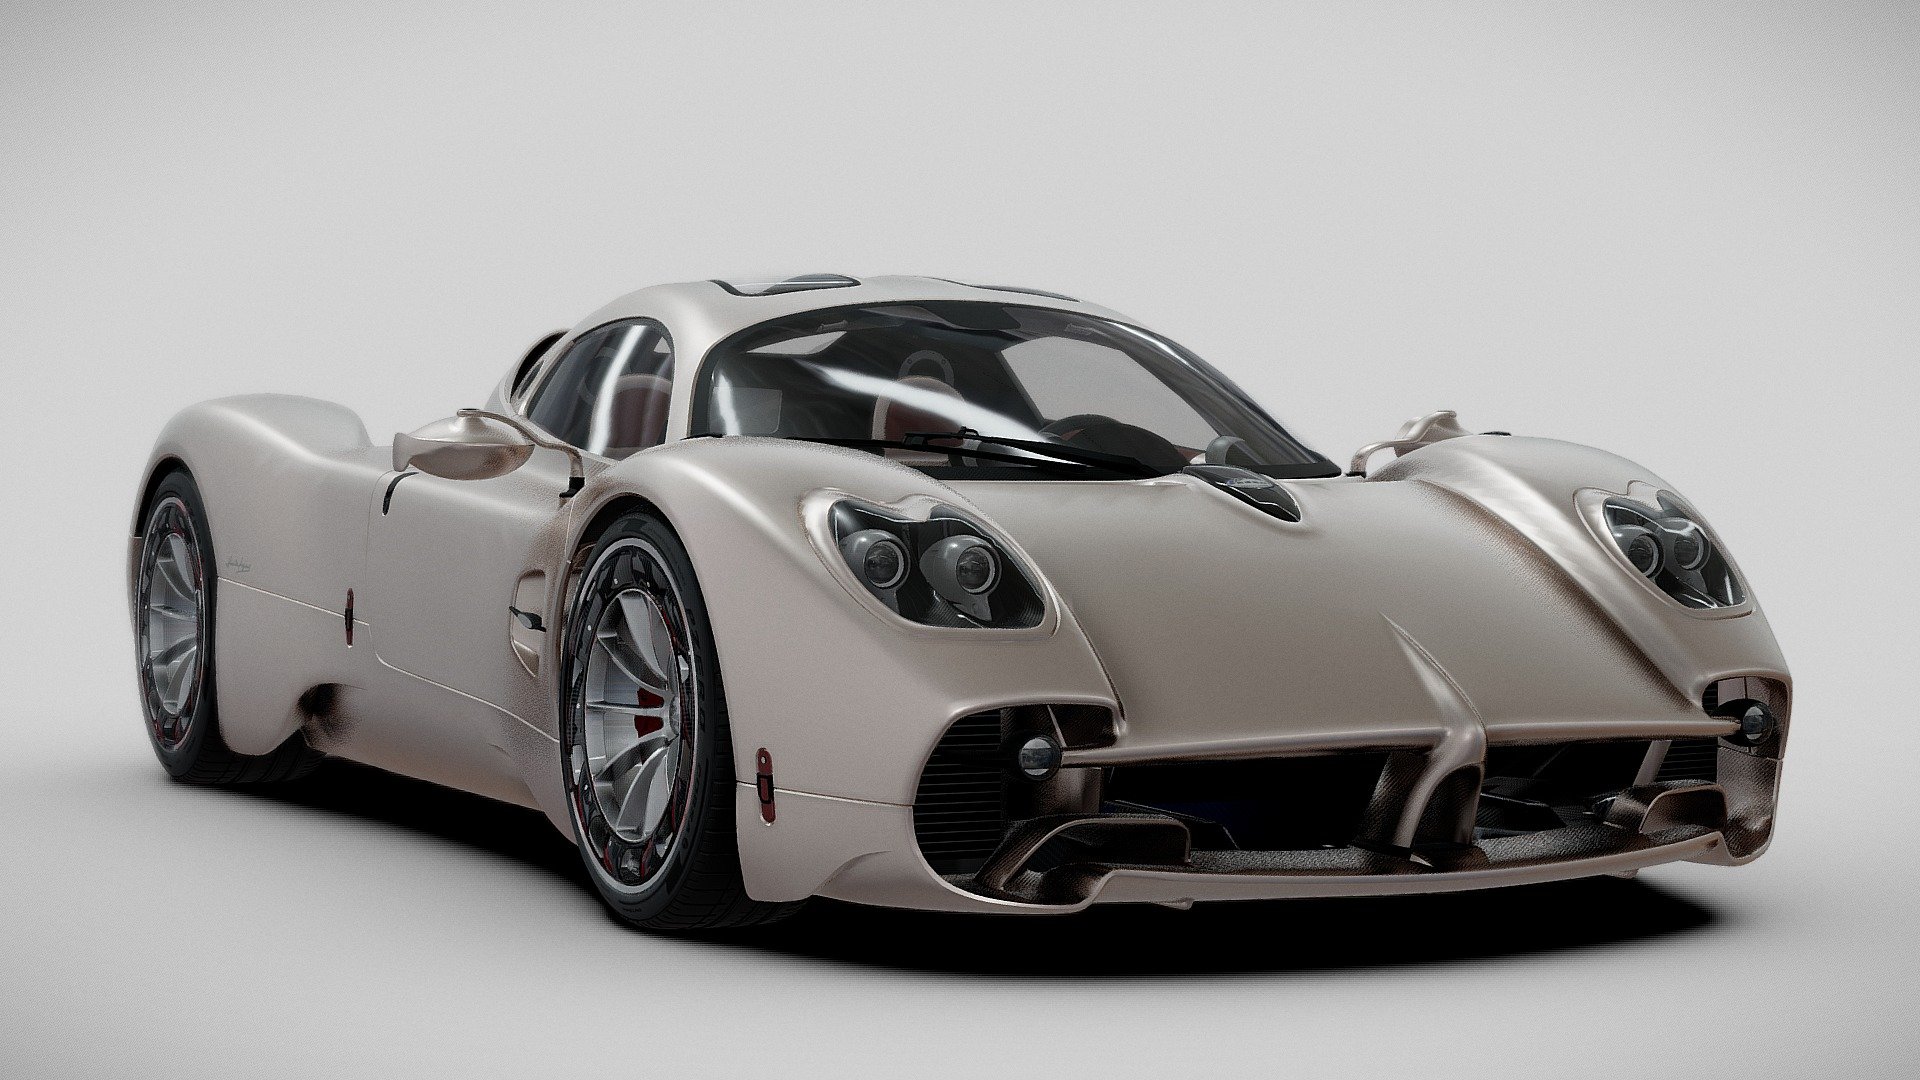 Pagani Utopia 2023
.

HIGH END / high poly / fully editable / rigable / interiour

by getting this model you have full control on meshes and materials

you can even subdivide or unsubdivide all parts for having better look by your needs.

.

**don't forget to like and share your thoughts!! 🍻 .

.

you can support me by folowing me on instagram

my ig: ZIRODESIGN - Pagani Utopia 2023 - Buy Royalty Free 3D model by ZIRODESIGN 3d model